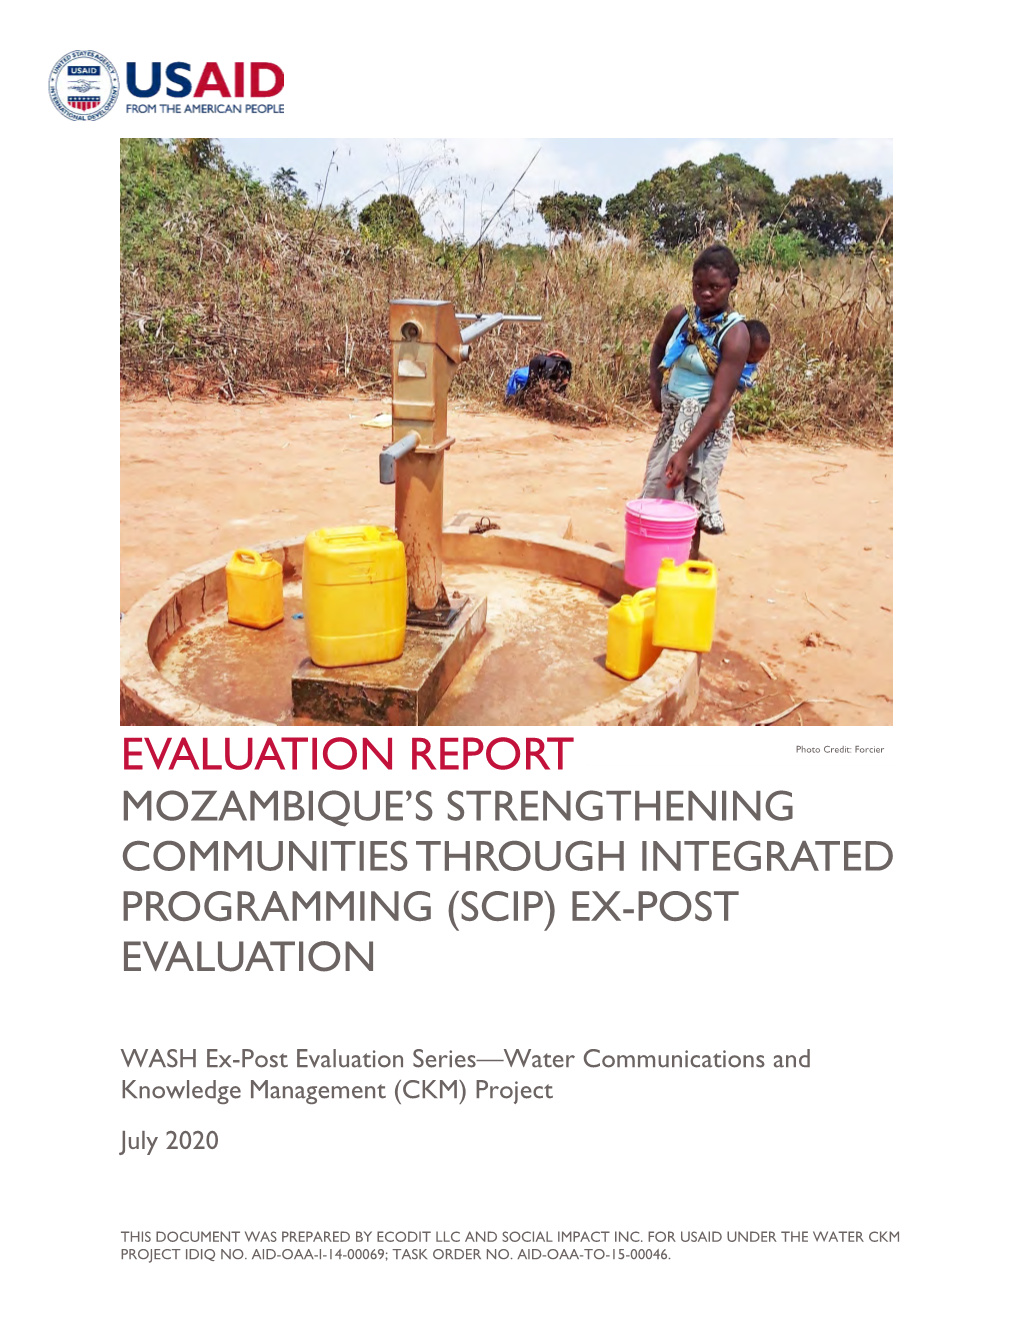 EVALUATION REPORT Photo Credit: Forcier MOZAMBIQUE’S STRENGTHENING COMMUNITIES THROUGH INTEGRATED PROGRAMMING (SCIP) EX-POST EVALUATION